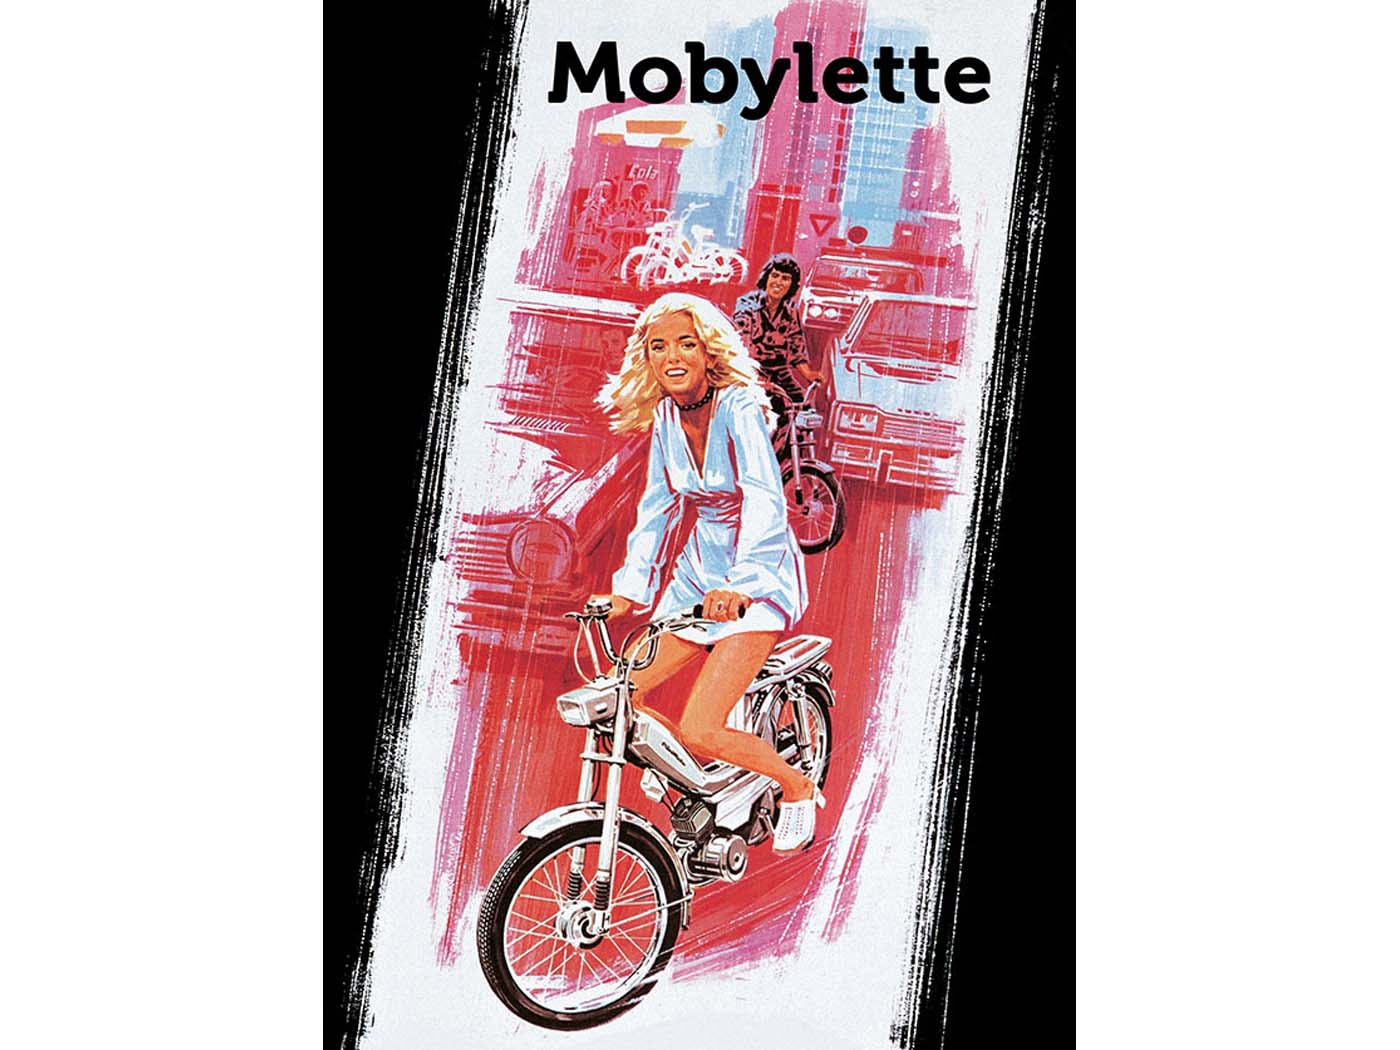 Advertising Poster Reprint 42cm Height 29cm Width For Motobecane Mobylette Mini Moby